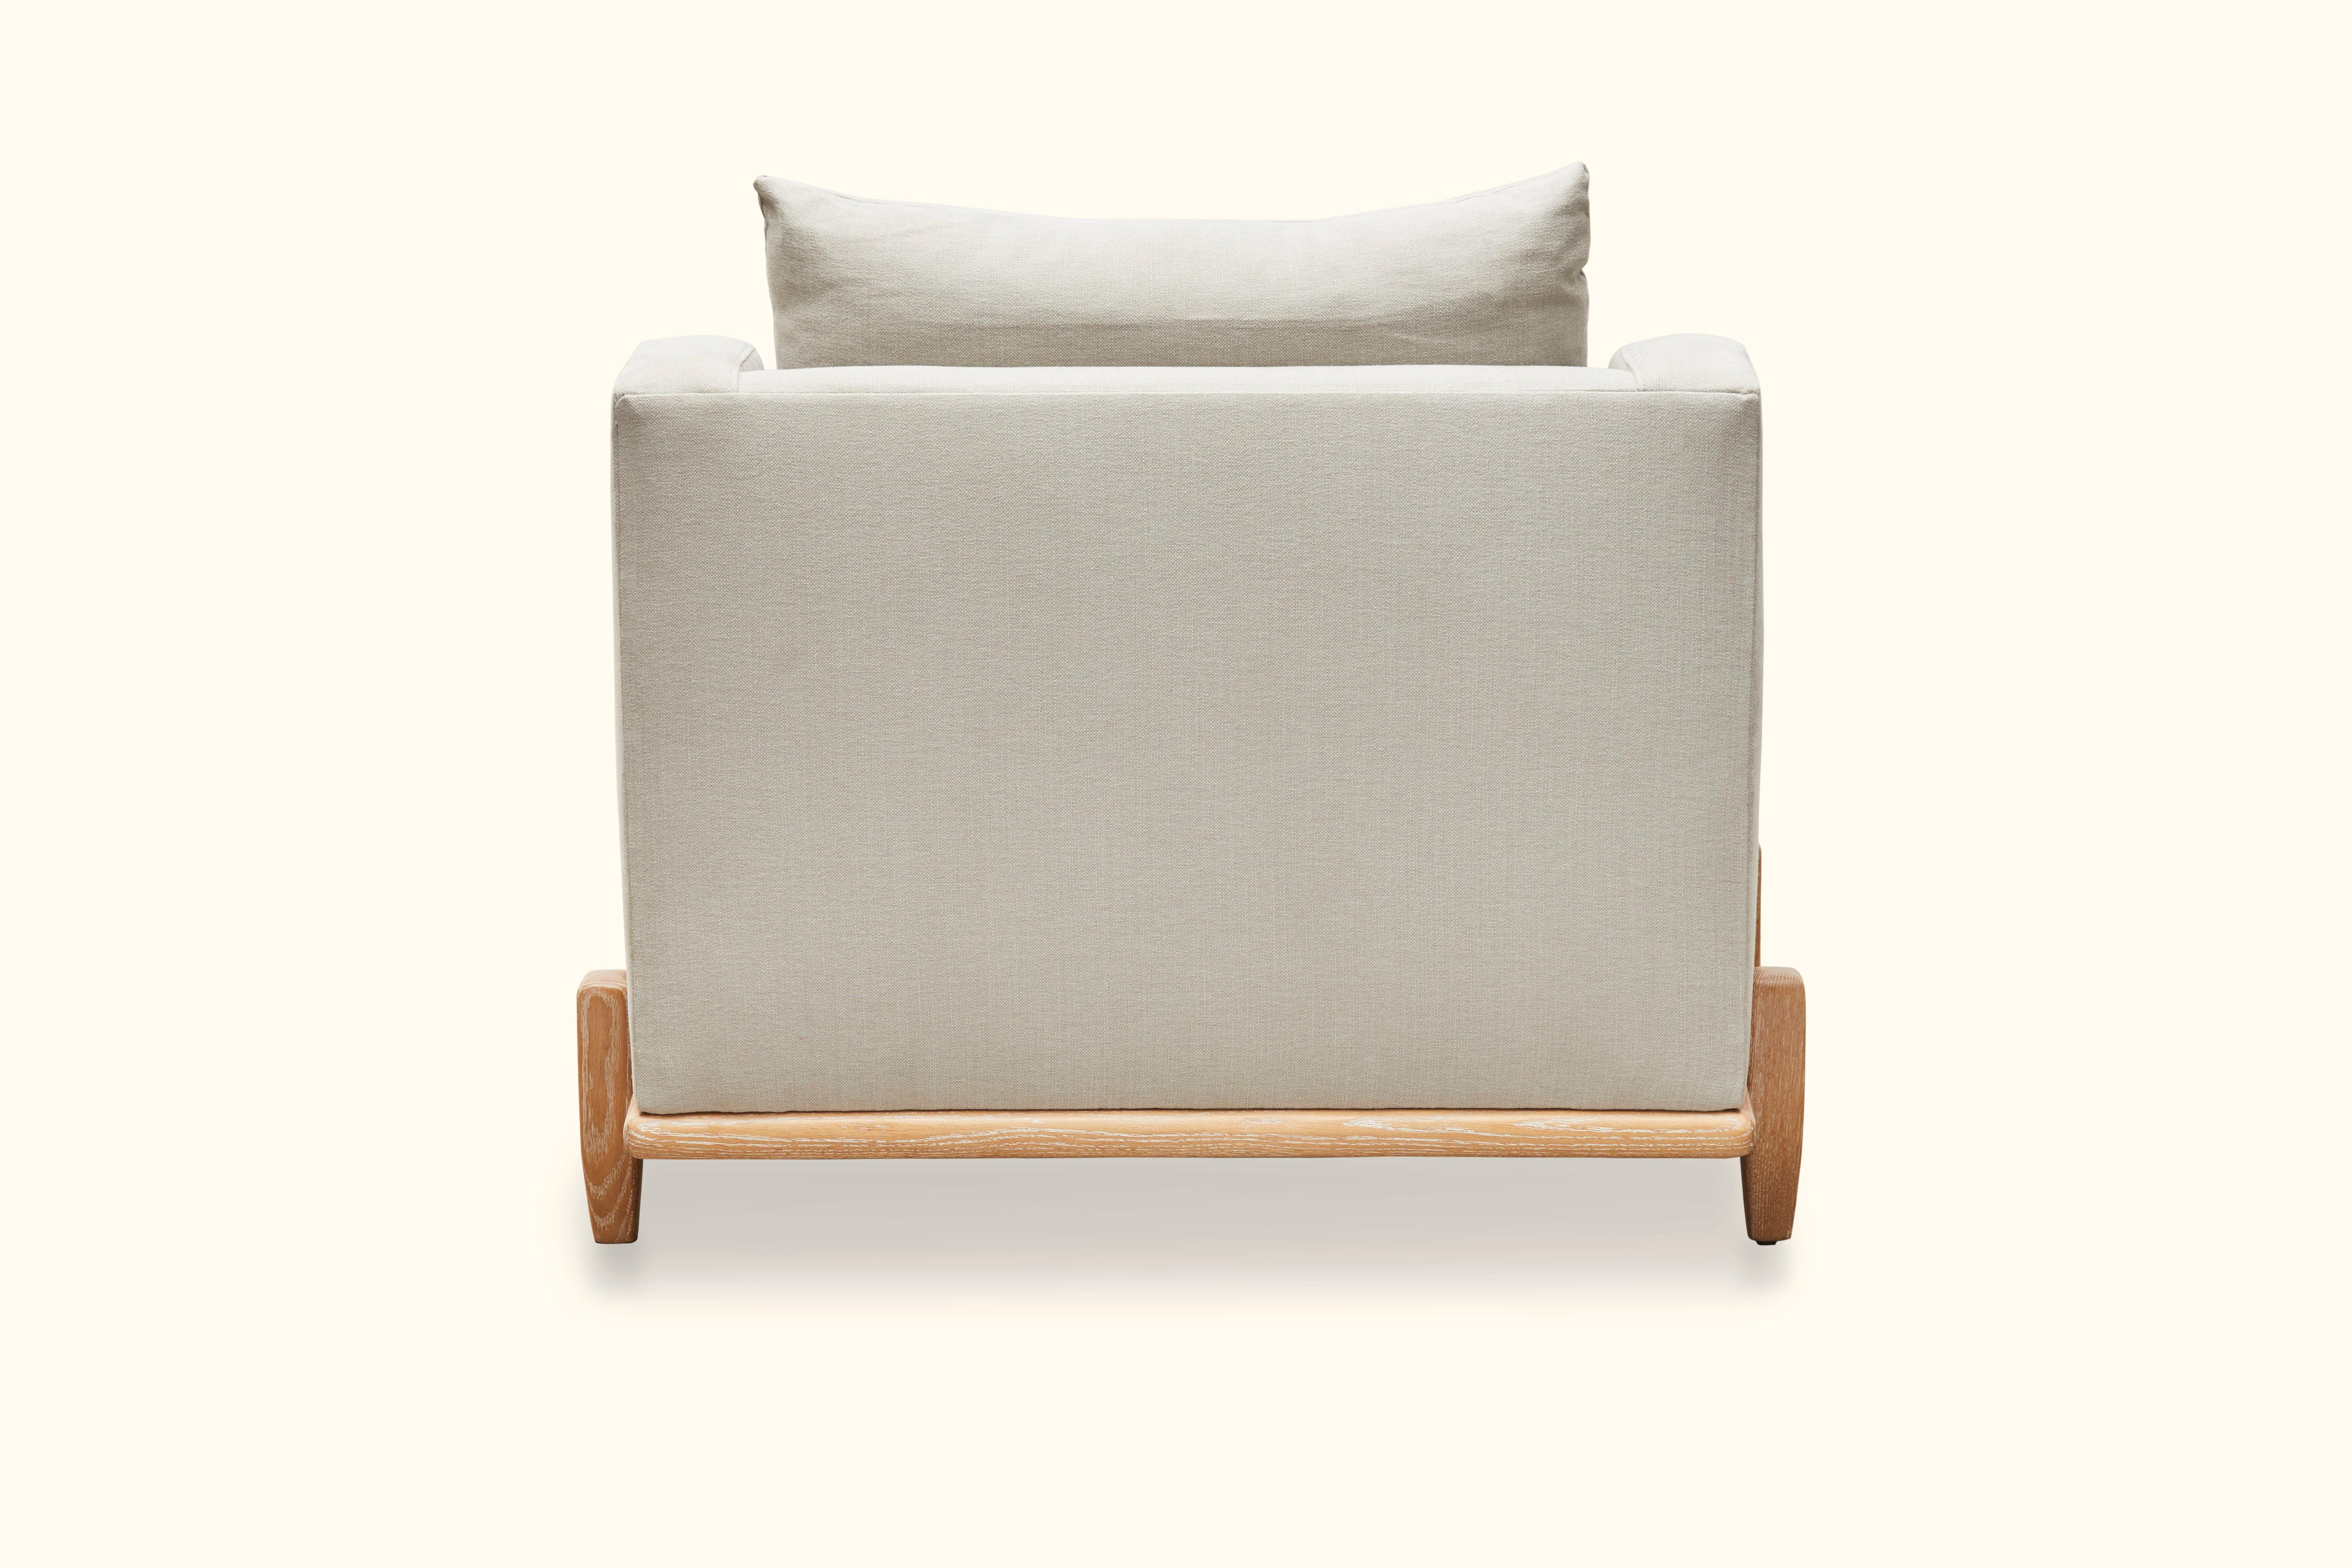 American White Linen and Oak George Chair by Brian Paquette for Lawson-Fenning